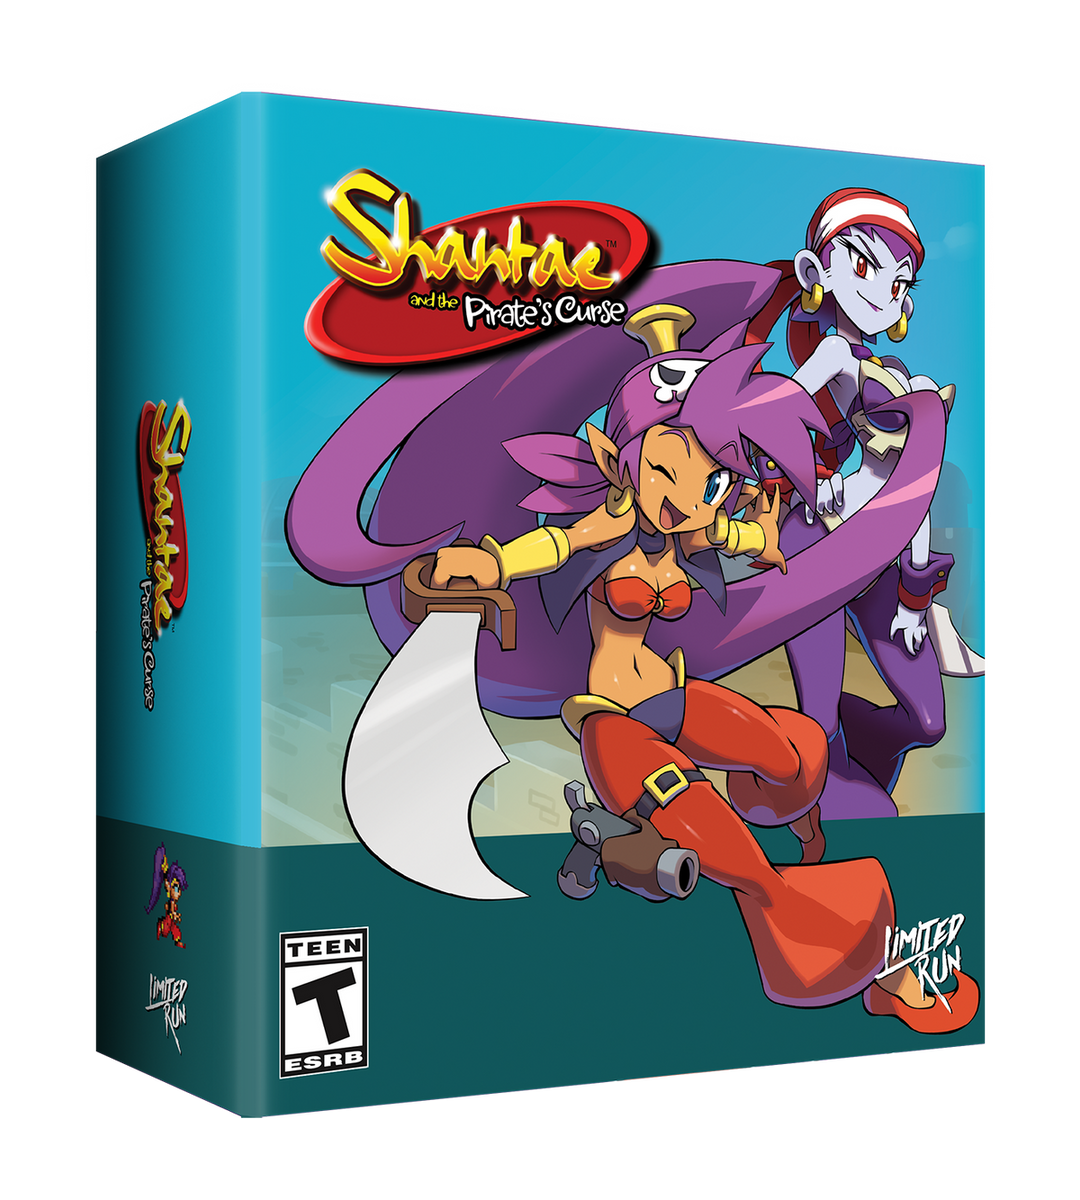 Shantae And The Pirates Curse Collectors Edition Limited Run Gamesn Collector Vault Store 4948